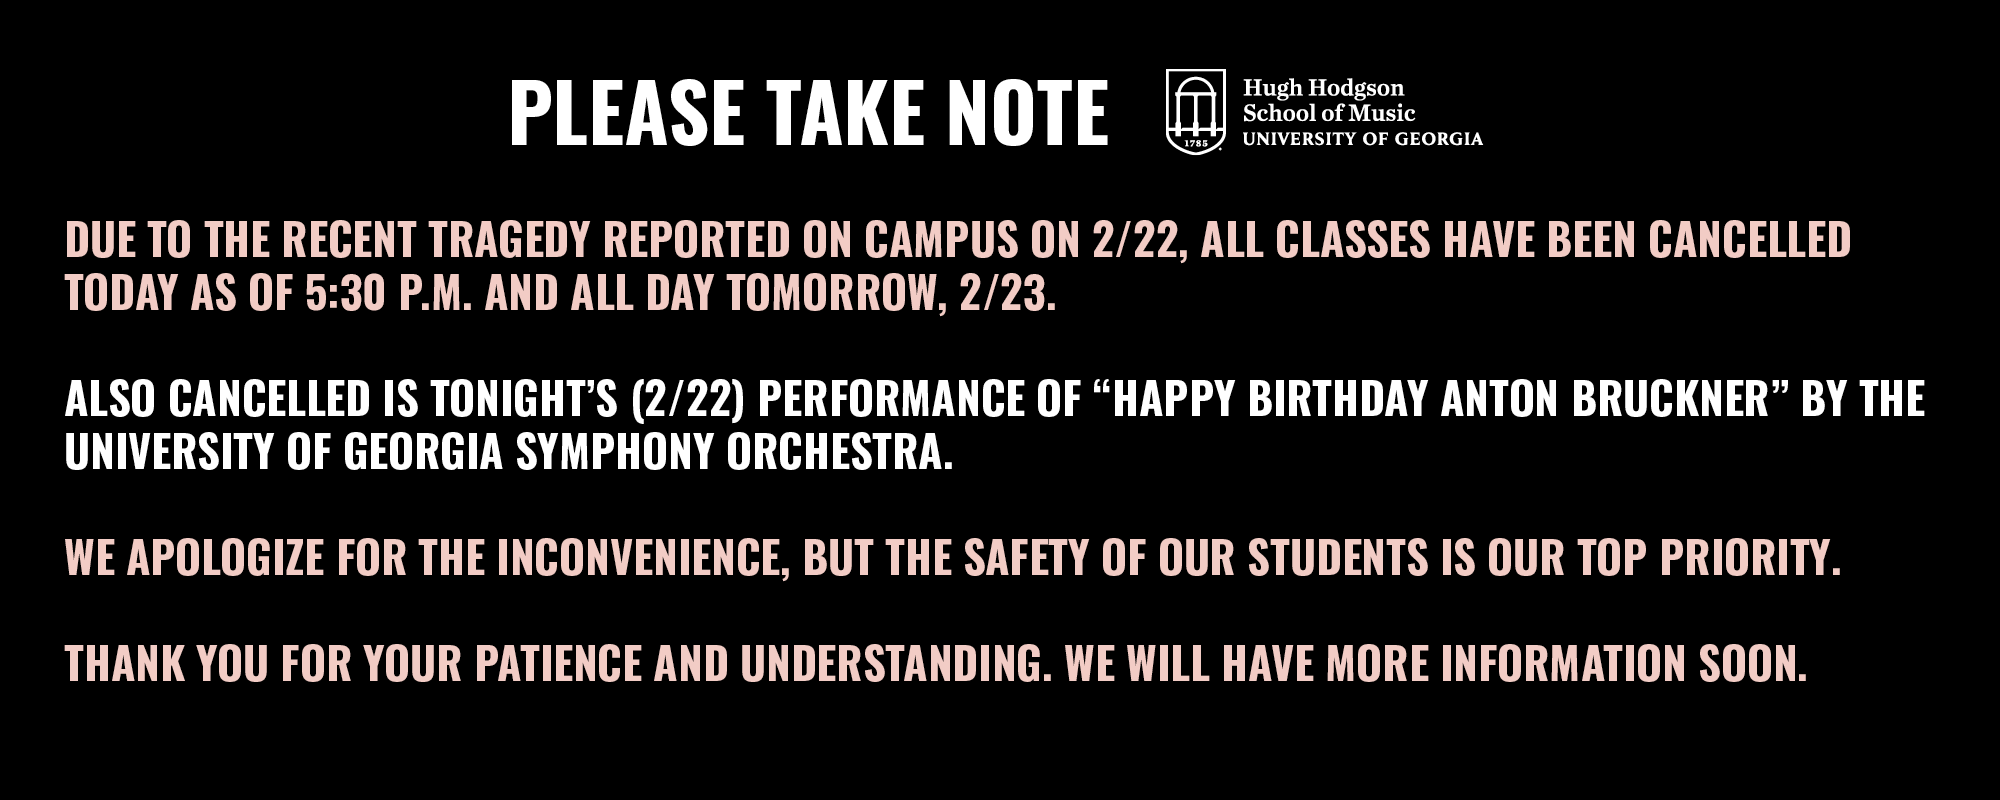 Due to the recent tragedy reported on campus this afternoon, all classes have been cancelled today as of 5:30 P.M. and all day tomorrow.    Also cancelled is tonight’s performance of  “Happy Birthday Anton Bruckner” by the University of Georgia Symphony Orchestra.   We apologize for the inconvenience, but the safety of our students is our top priority.   Thank you for your patience and understanding. We will have more information soon. 